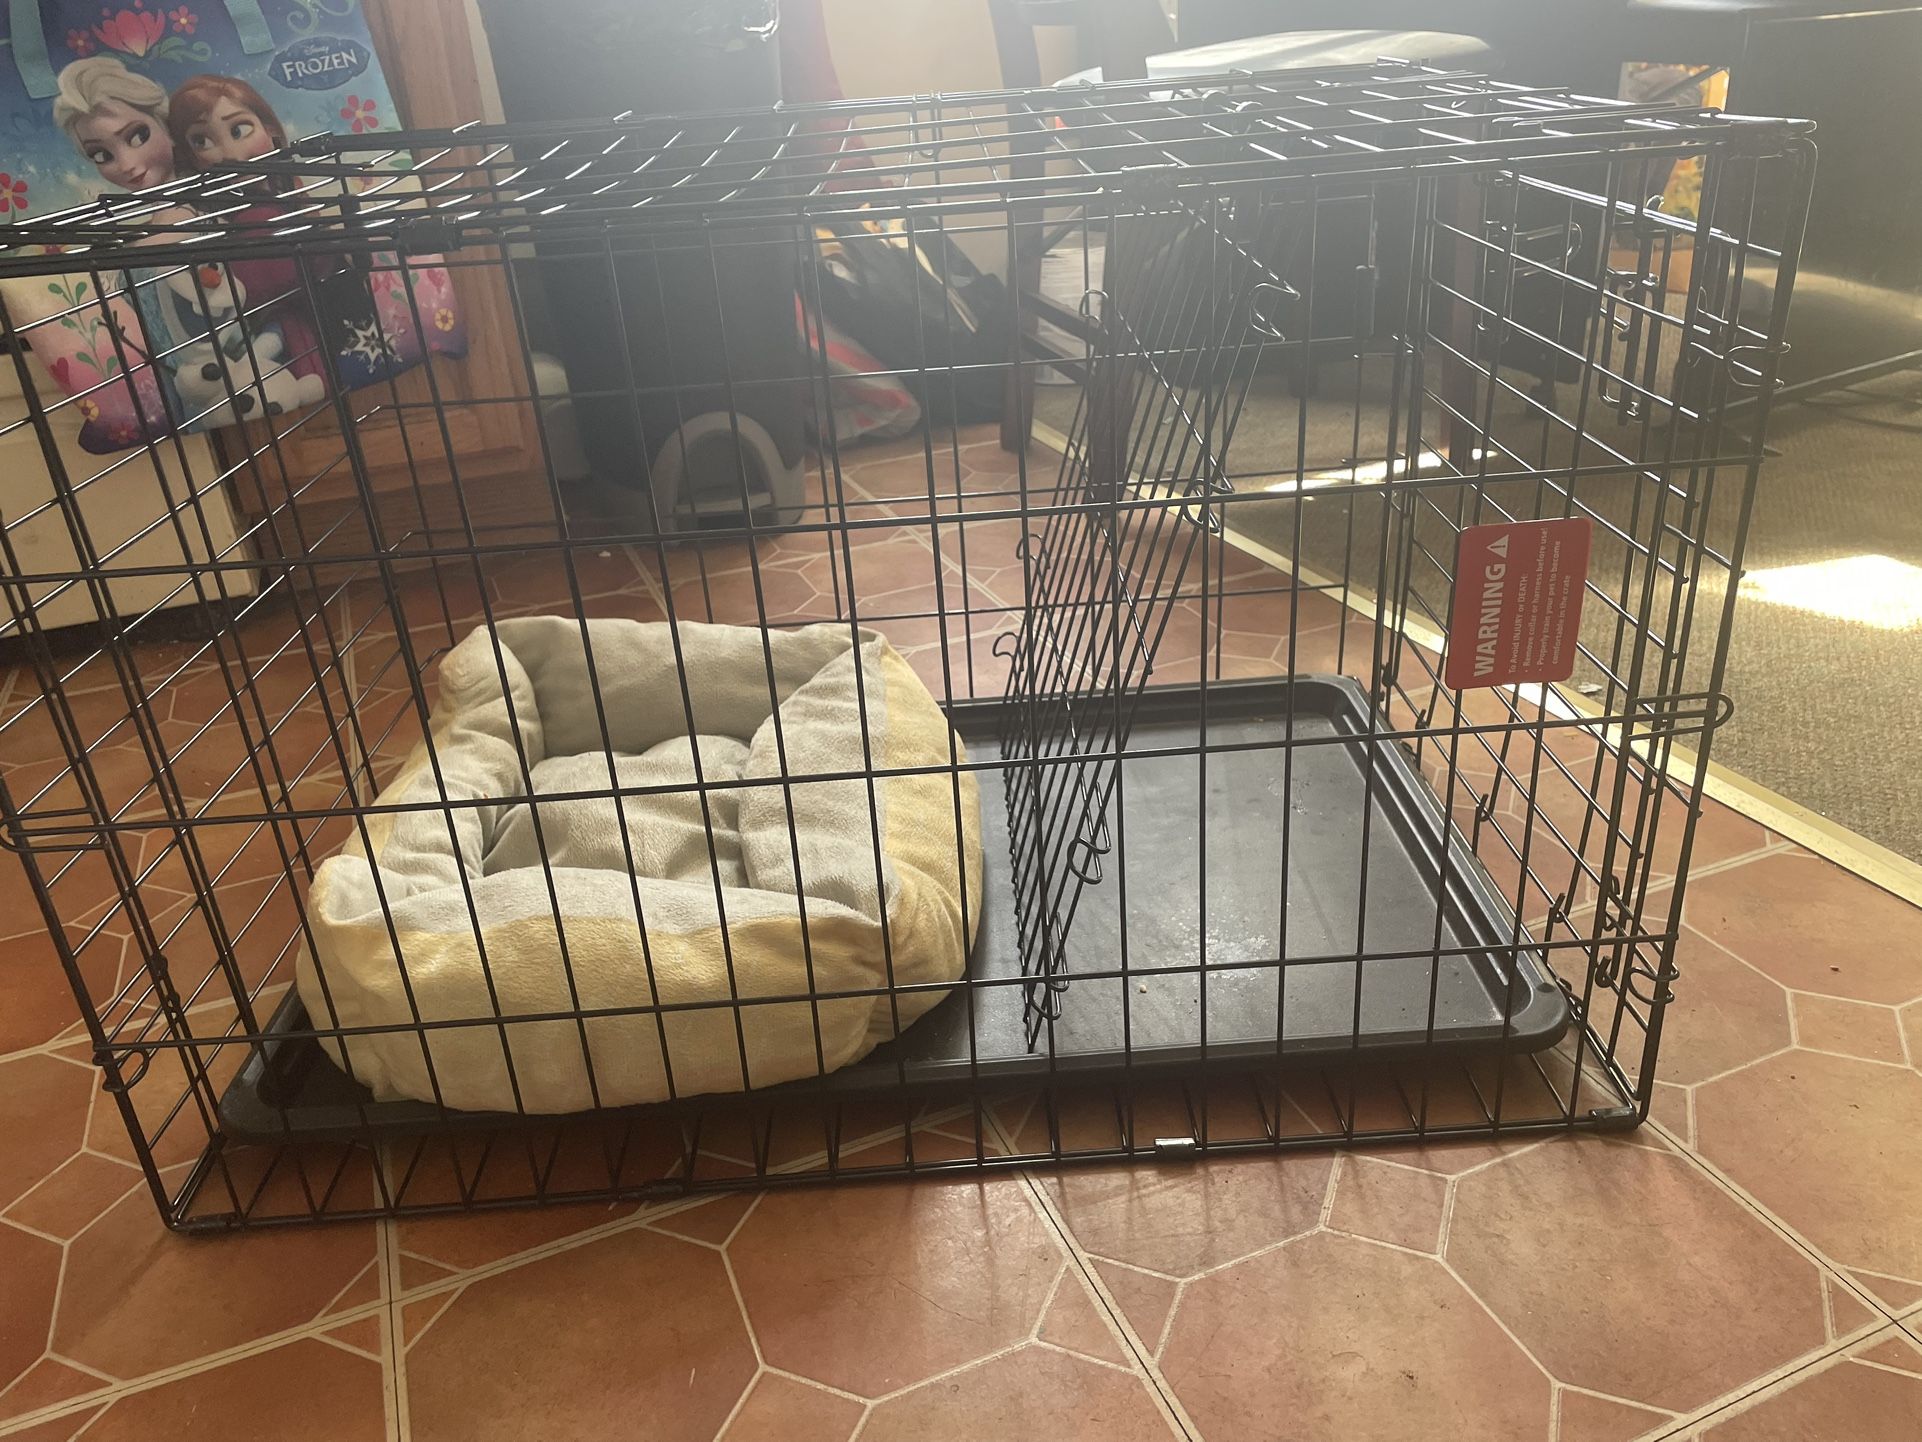 Double dog cage